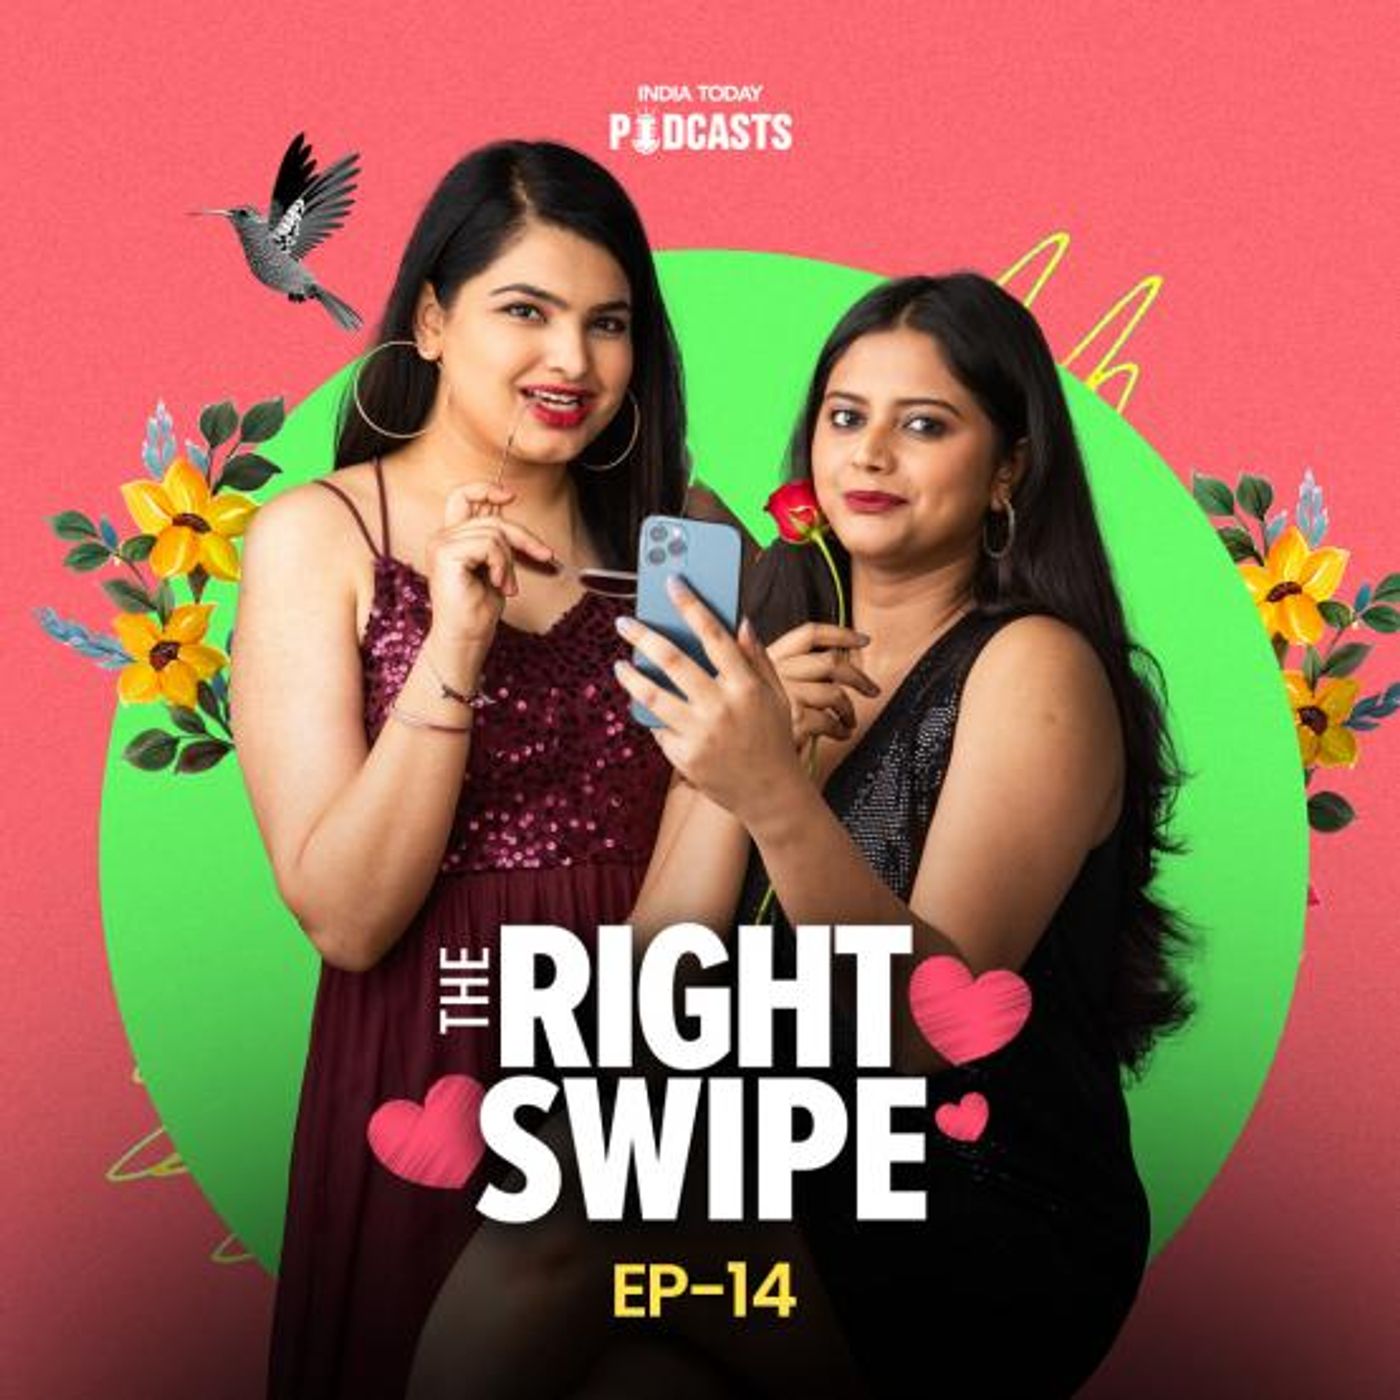 Real-time Review Of Women’s Dating Profiles| The Right Swipe Ep 14